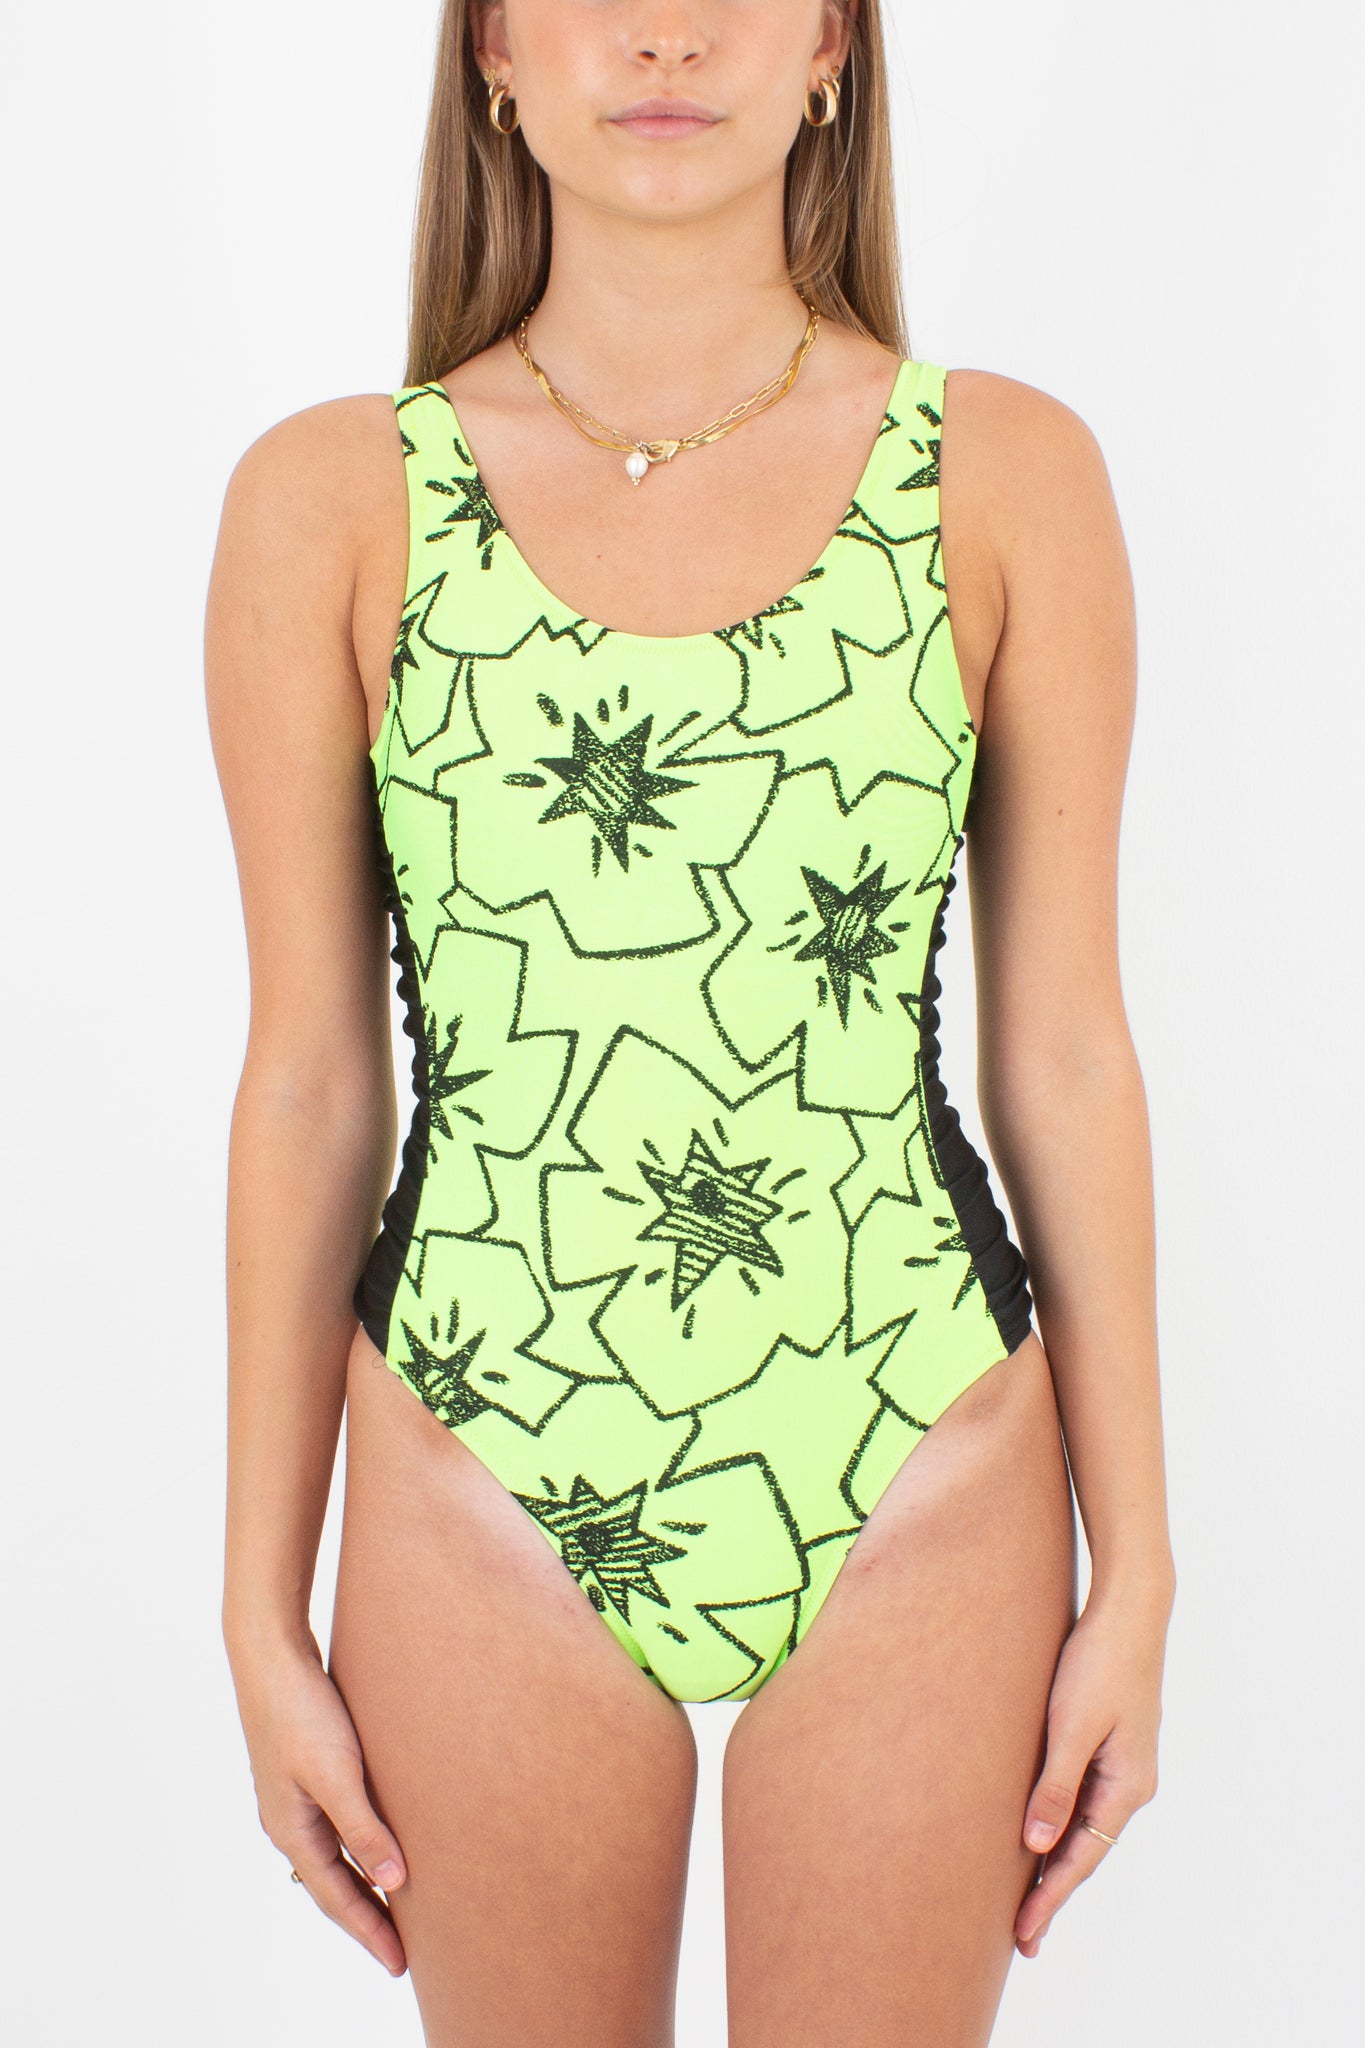 80s/90s Neon Yellow with Black Flowers One Piece Swimsuit - Size XS & S